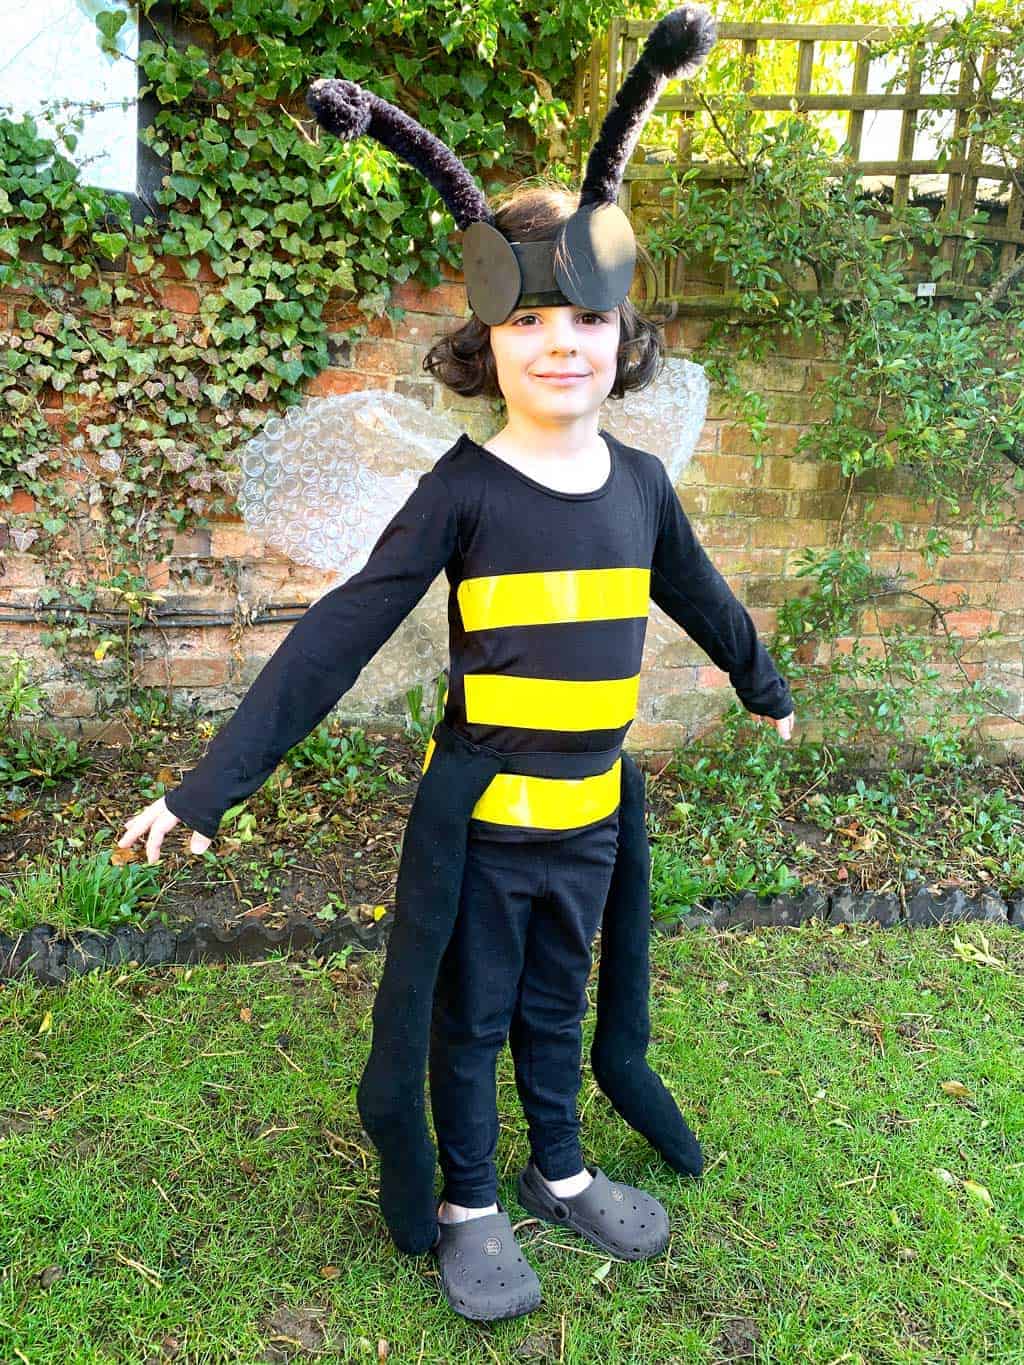 Ever wanted to know how to Make a Bumble Bee Costume? This bumble bee fancy dress tutorial is super easy